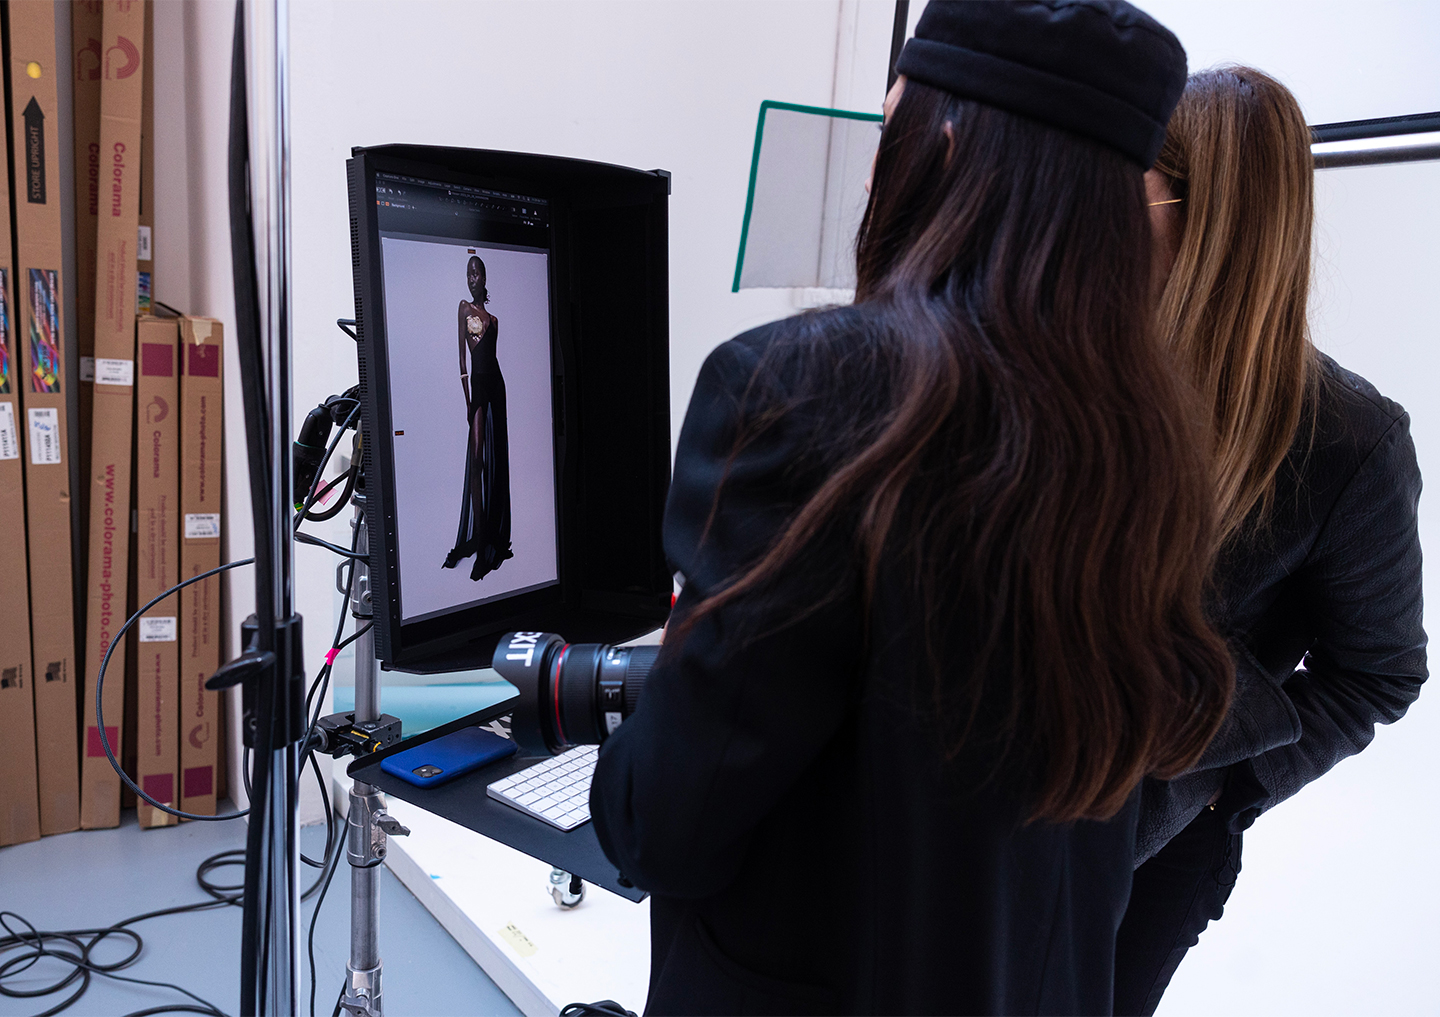 A backstage moment from the shoot by Istituto Marangoni Fashion Styling Masters student Natalia Campos Valencia